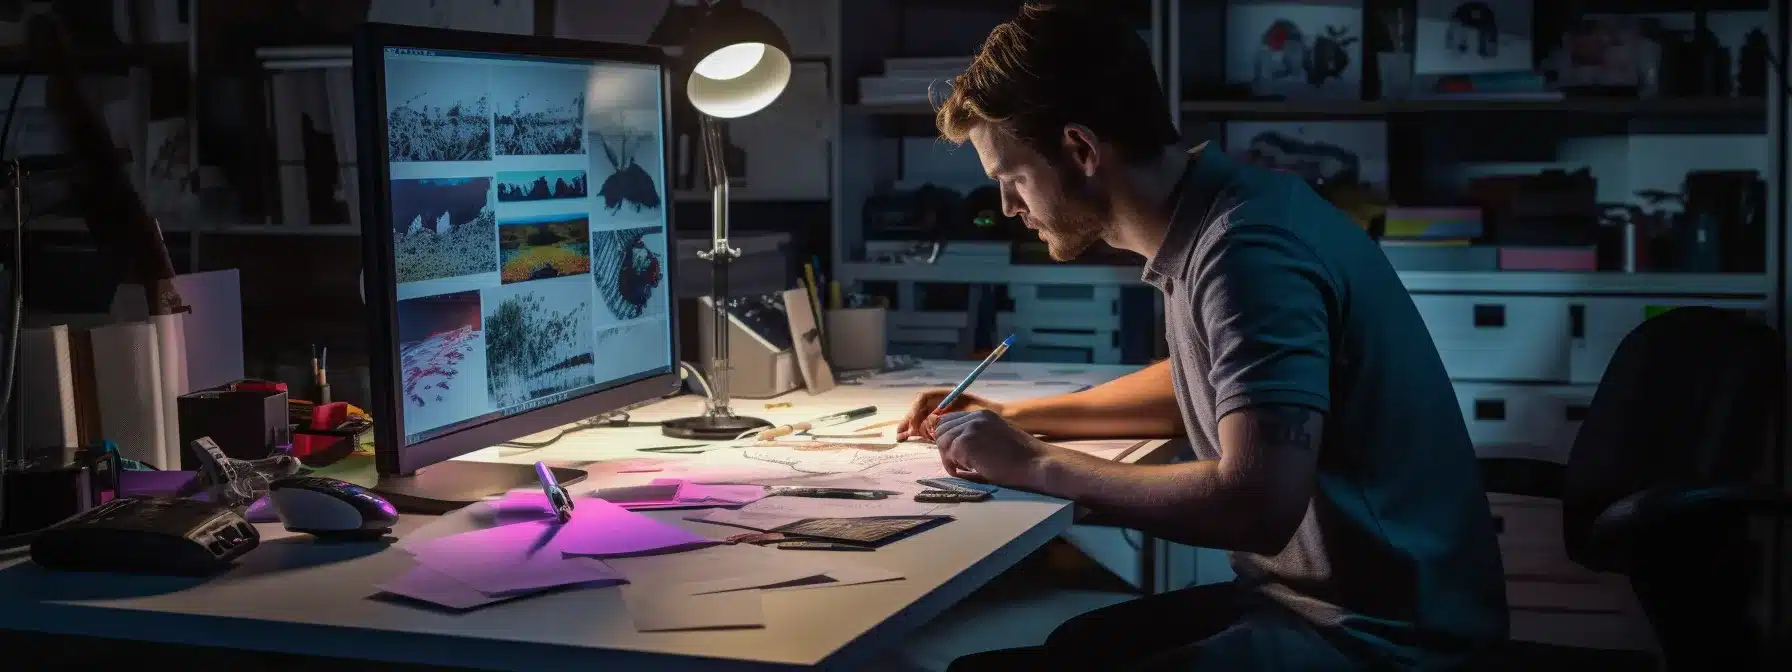 A Designer Working On A Computer, Surrounded By Sketches And Brand Color Samples, Brainstorming And Crafting A New Brand Identity.